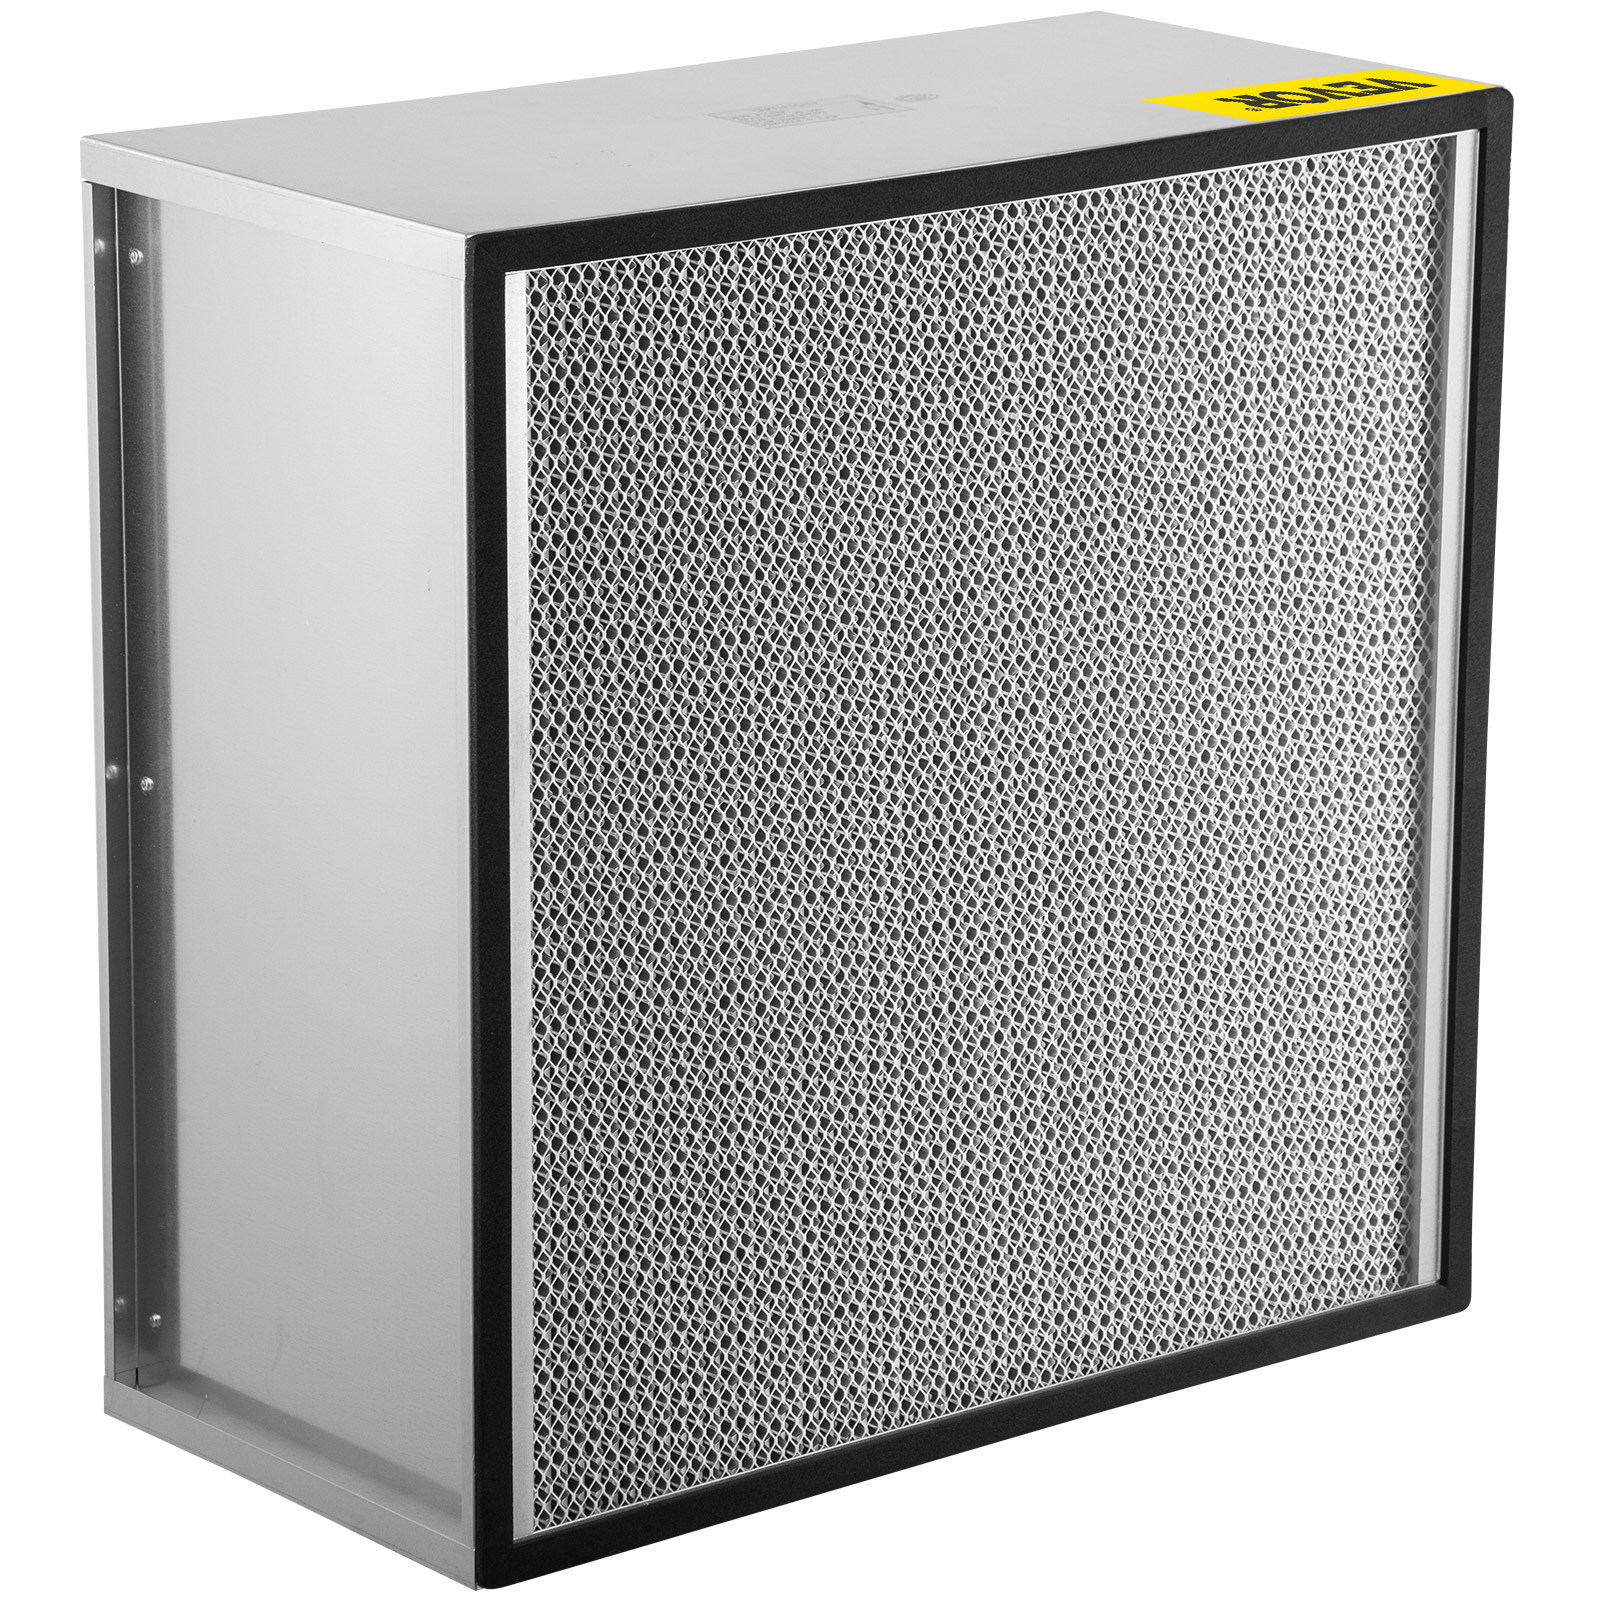 Vevor Hepa Filter Replacement Pleated Air Filter 24x24x11.5in Galvanized Frame от Vevor Many GEOs